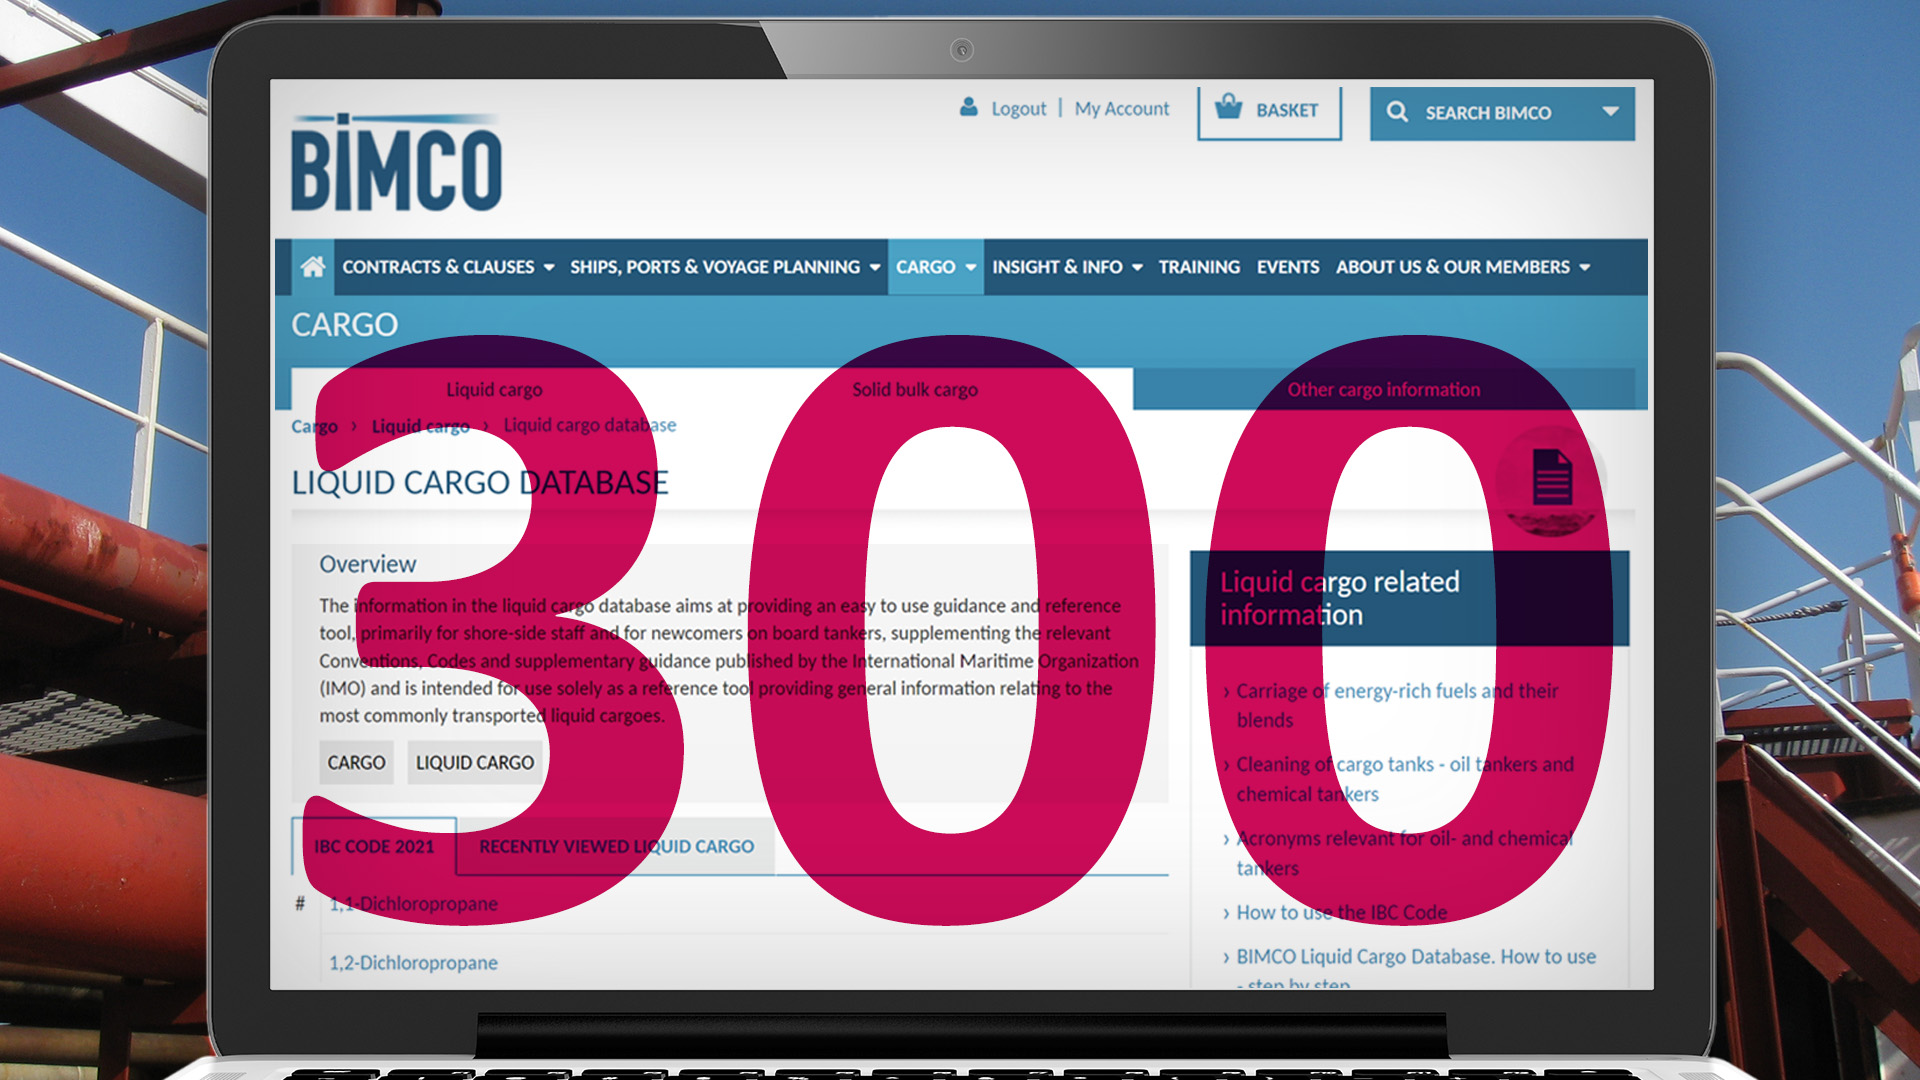 Laptop screen showing the BIMCO Liquid Cargo Database webpage with the number 300 superimposed over it in red